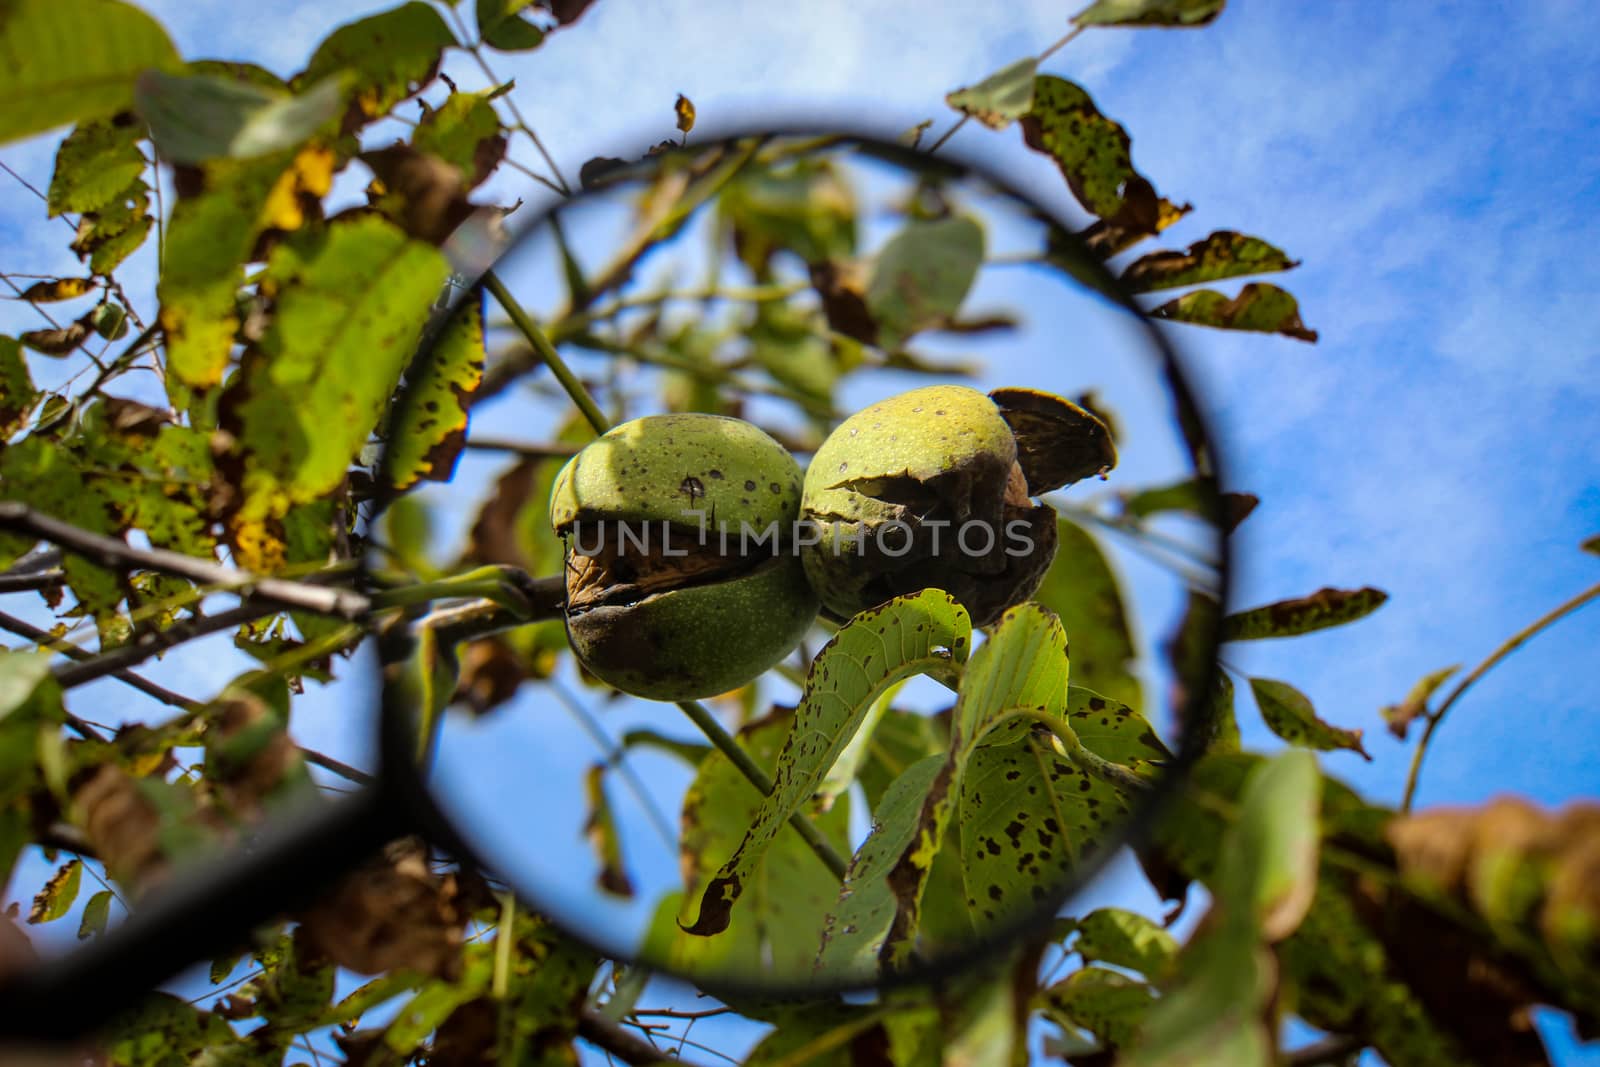 Walnut fruit enlarged with a magnifying glass. Close up of a ripe walnut inside a cracked green shell on a branch with the sky in the background. Zavidovici, Bosnia and Herzegovina.